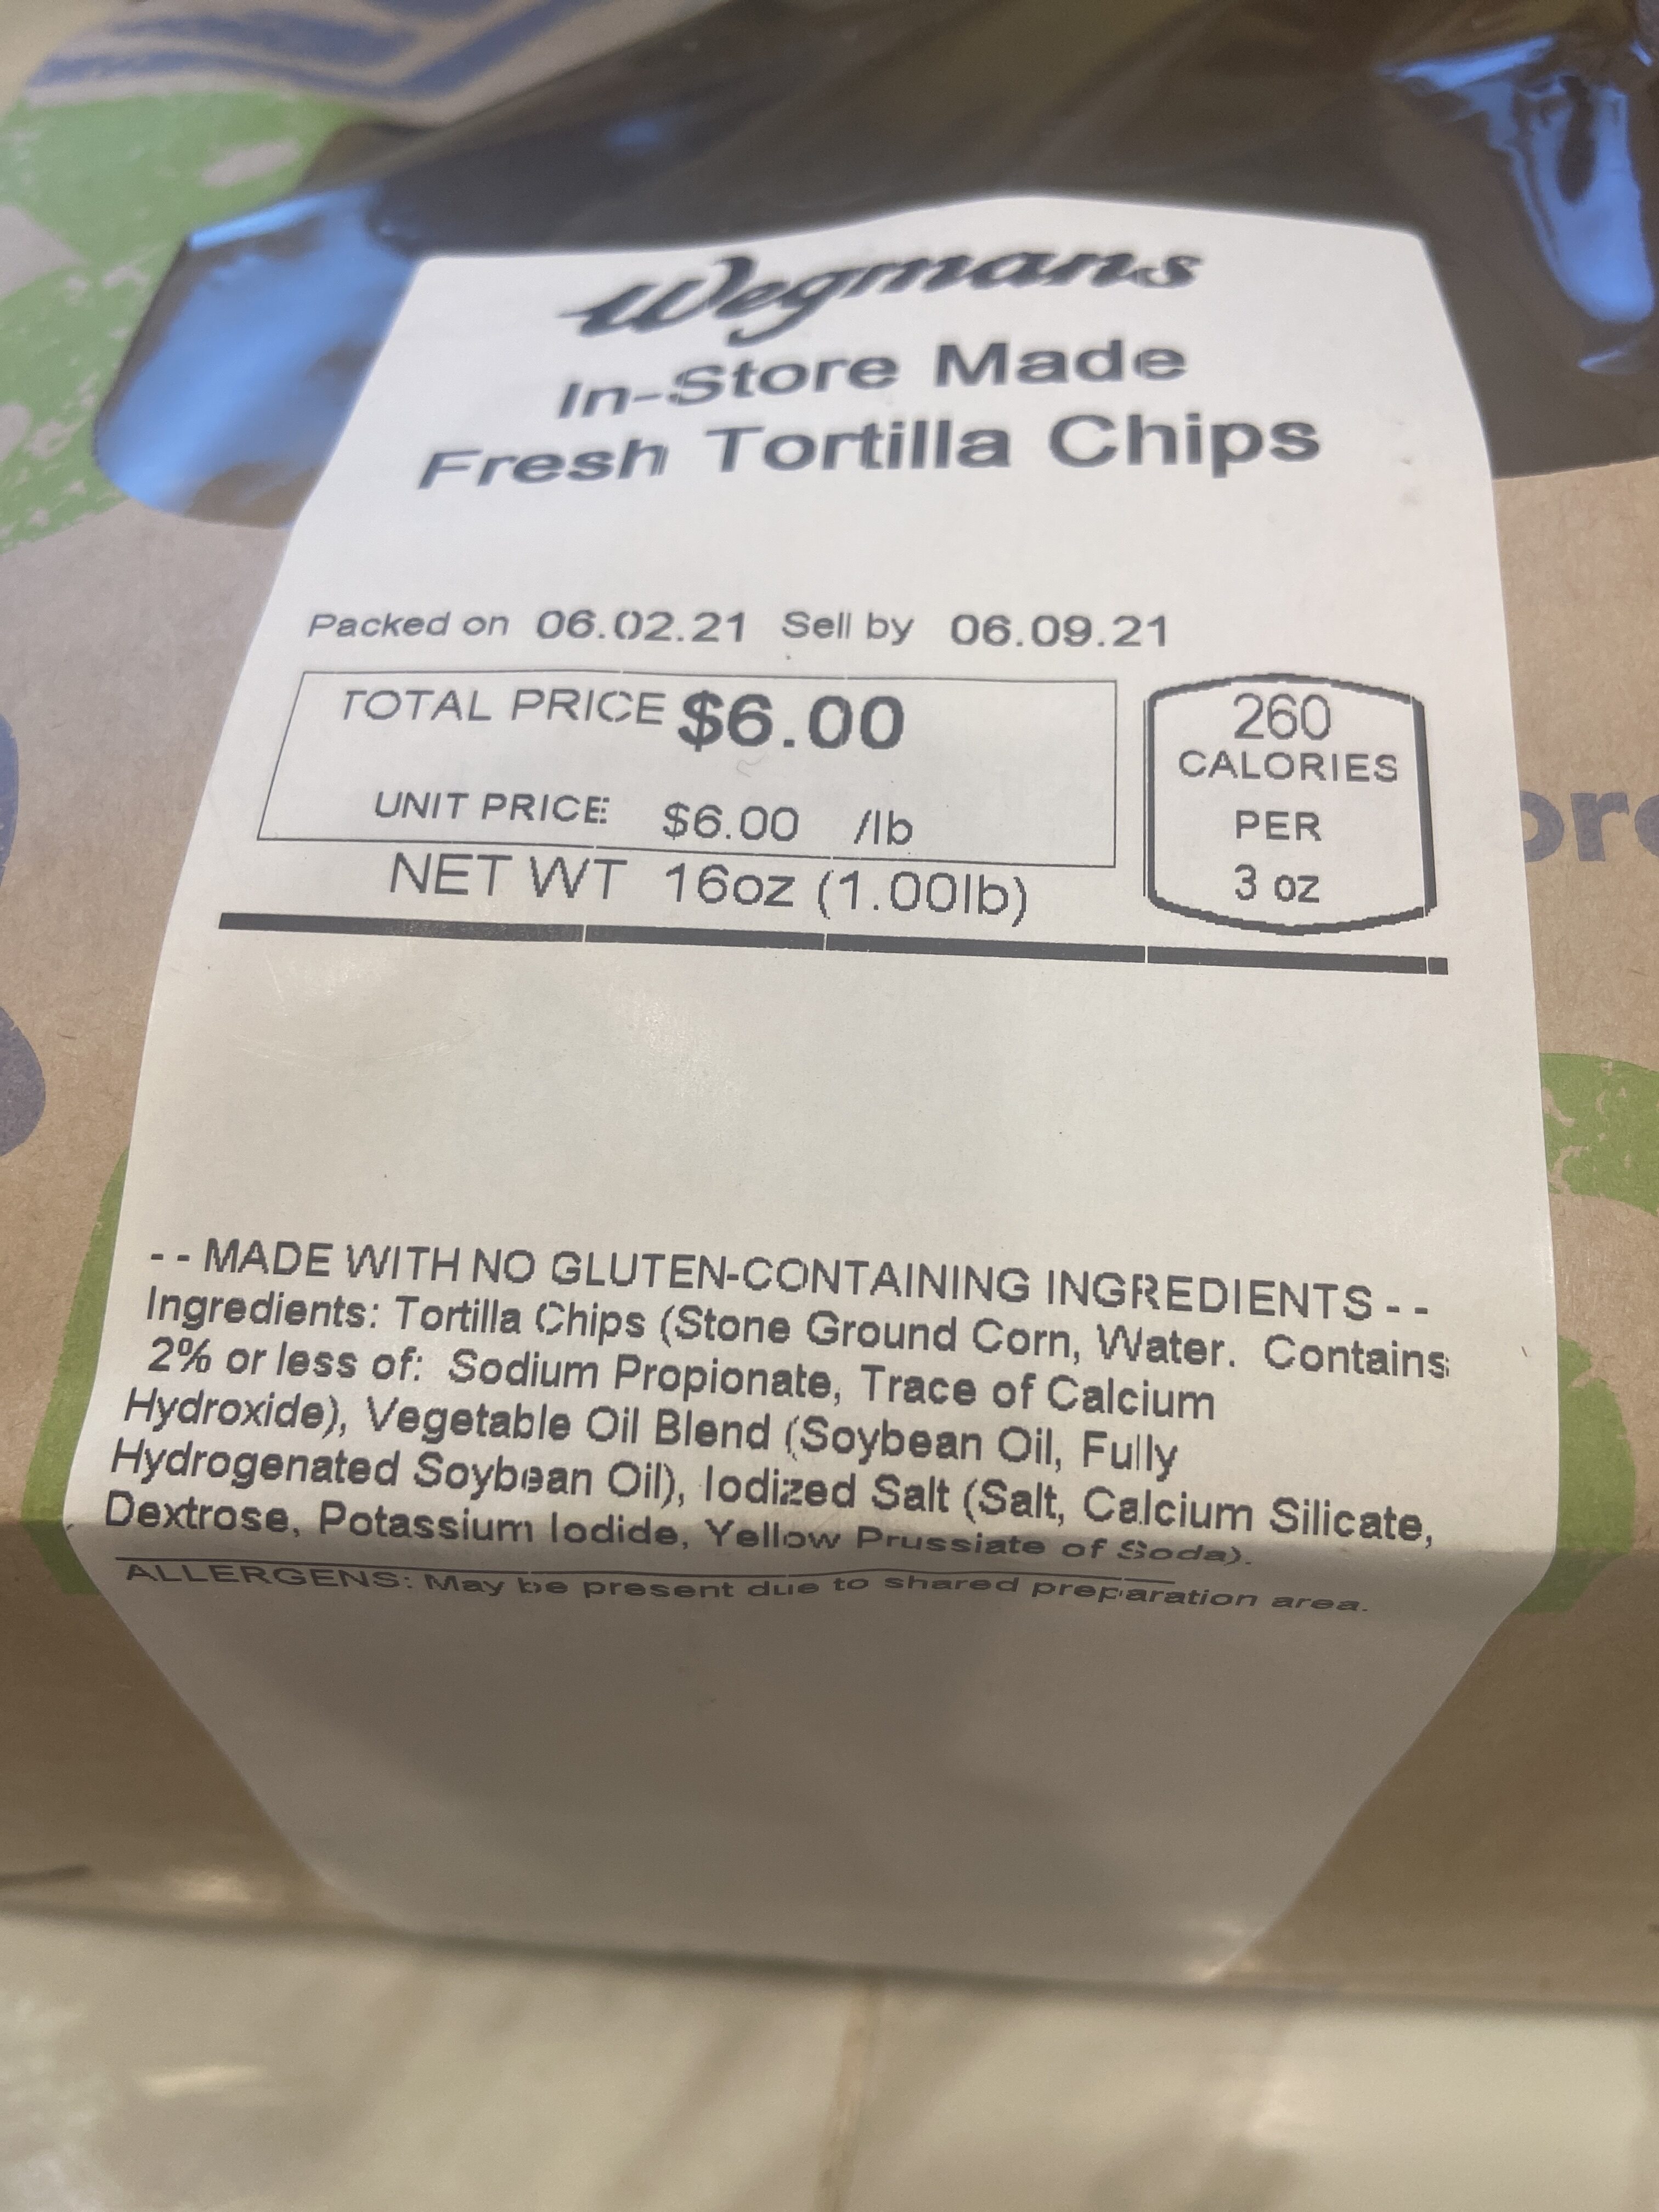 In-Store Made Fresh Tortilla Chips - Ingredients